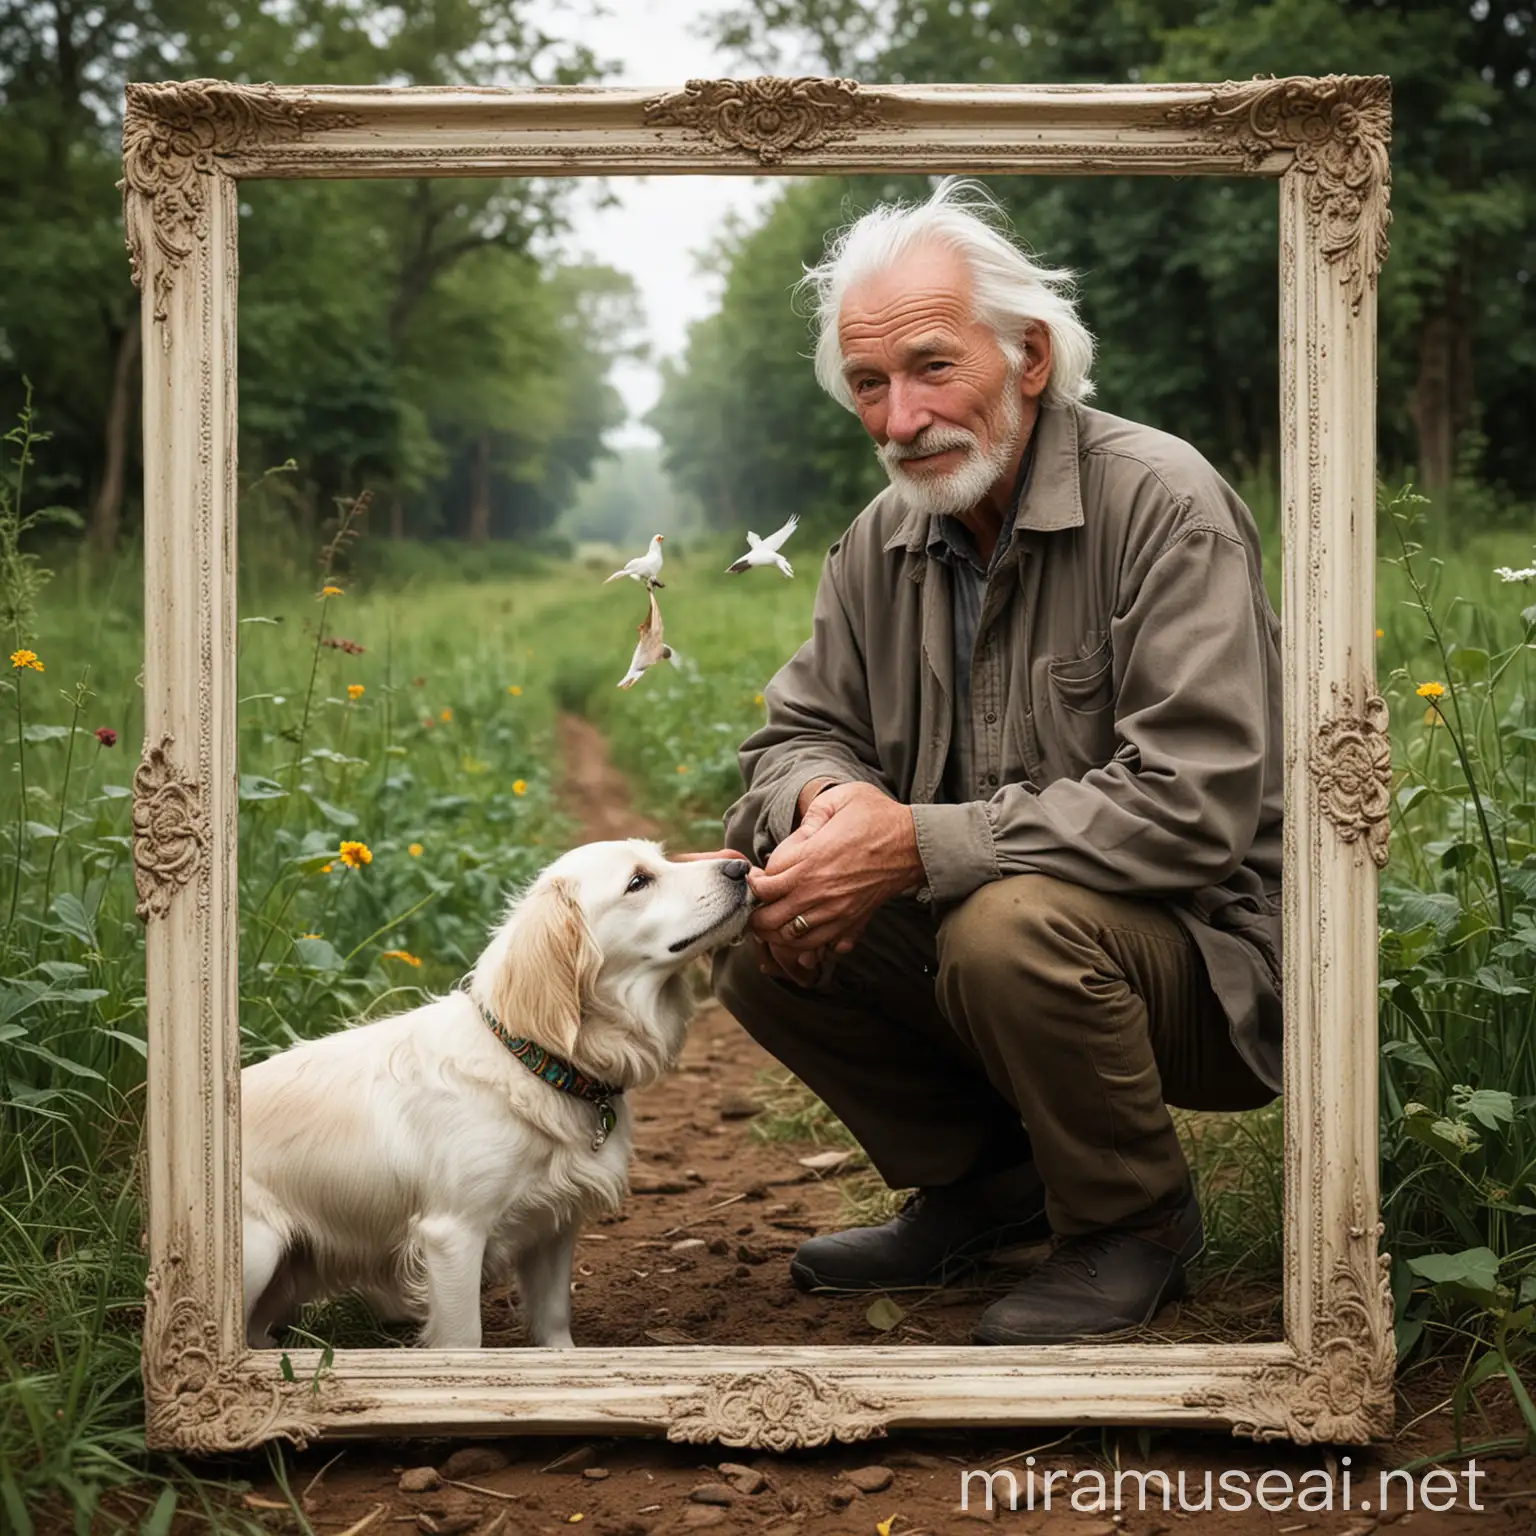 As mentioned, John, an old man lived in a remote village.  She was a passionate animal handler and always gave her time to help dogs and birds.  John had led a spiritual life full of love and hard work for nature and animals.

 In the early morning, John was walking lightly in the field.  He was an old man with white hair and a wrinkled face that showed years of hard work and sincerity.  He wore work clothes and a slouched hat and walked through the field, tending to the land and plants.  The smell of fresh plants and soil was around him.

 Behind John, there was an empty frame.  A big and beautiful frame that was eagerly waiting to put a picture inside it.  Carefully, John glued a picture of a bird in flight to a piece of paper and placed it inside the frame.  The bird had colorful feathers that flew in the sky and showed the freedom and beauty of nature.

 But John was not alone.  In his right hand, he held a faithful dog with a beautiful necklace.  This dog expressed love and intimacy through his eyes, showing the connection between humans and animals.  This dog had bright skin and hopeful eyes, which was a sign of faithful connection between soul and animal.

 When John looked at this beautiful picture, he felt joy and peace.  In the midst of nature, together with dogs and birds, he had found peace and happiness.  This image not only showed John's love and support for animals, but also served as a reminder of the strong and spiritual connection between him and animals.1. Pattern of Colorful Birds and Feathers:
   - Main color for the birds: #FFC300
   - Background color: #FFFFFF

2. Pattern of Tree Leaves and Plants:
   - Main color for the leaves: #007F4F
   - Background color: #F0F0F0

3. Pattern of Beautiful Dog Collars:
   - Main color for the dog collars: #FF69B4
   - Background color: #F8F8FF

4. Pattern of Nature and Farm:
   - Main color for the natural landscapes: #228B22
   - Background color: #FFEFD5